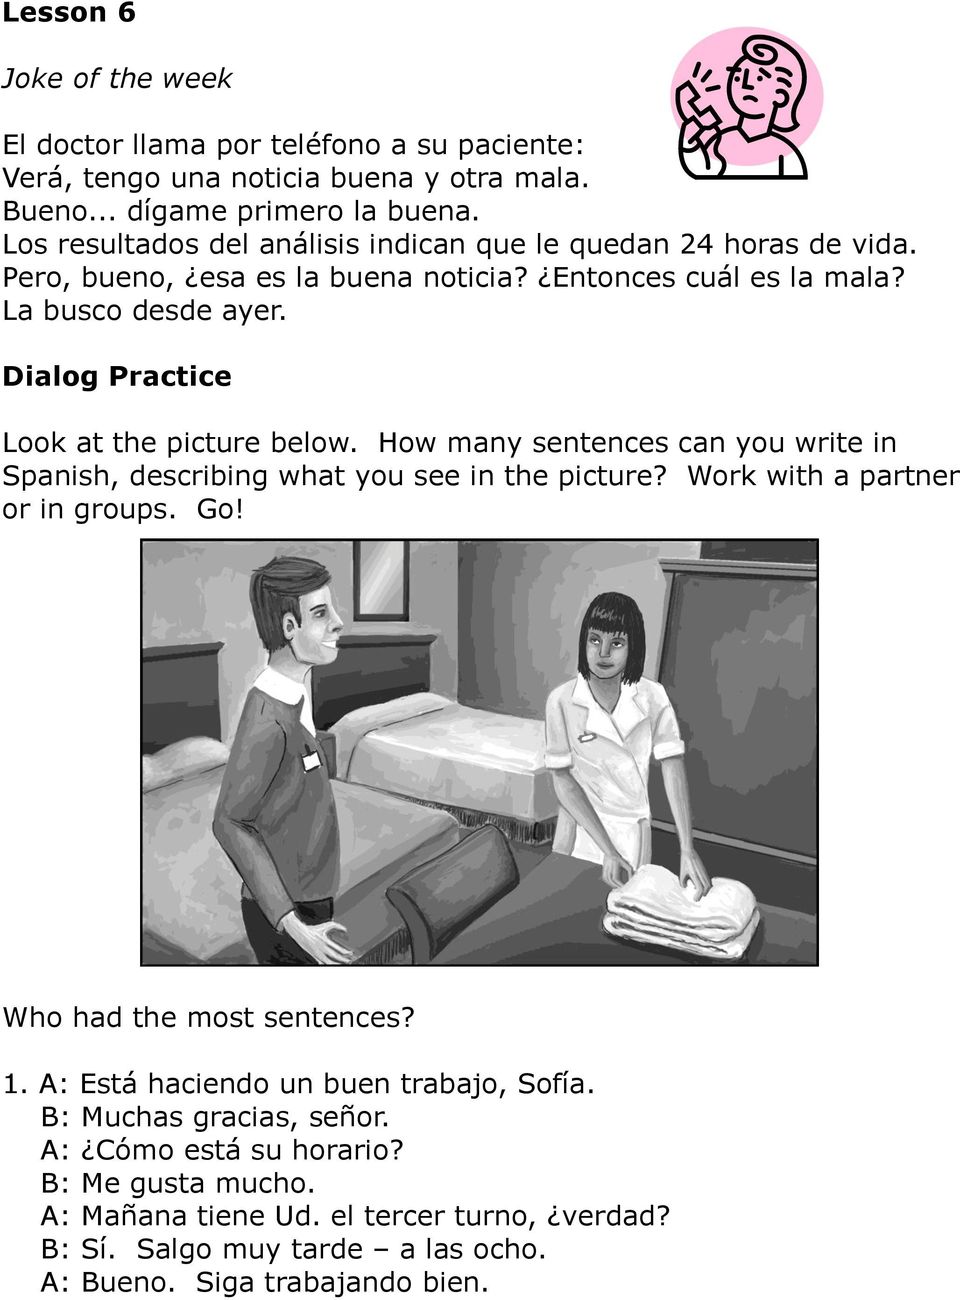 Dialog Practice Look at the picture below. How many sentences can you write in Spanish, describing what you see in the picture? Work with a partner or in groups. Go!